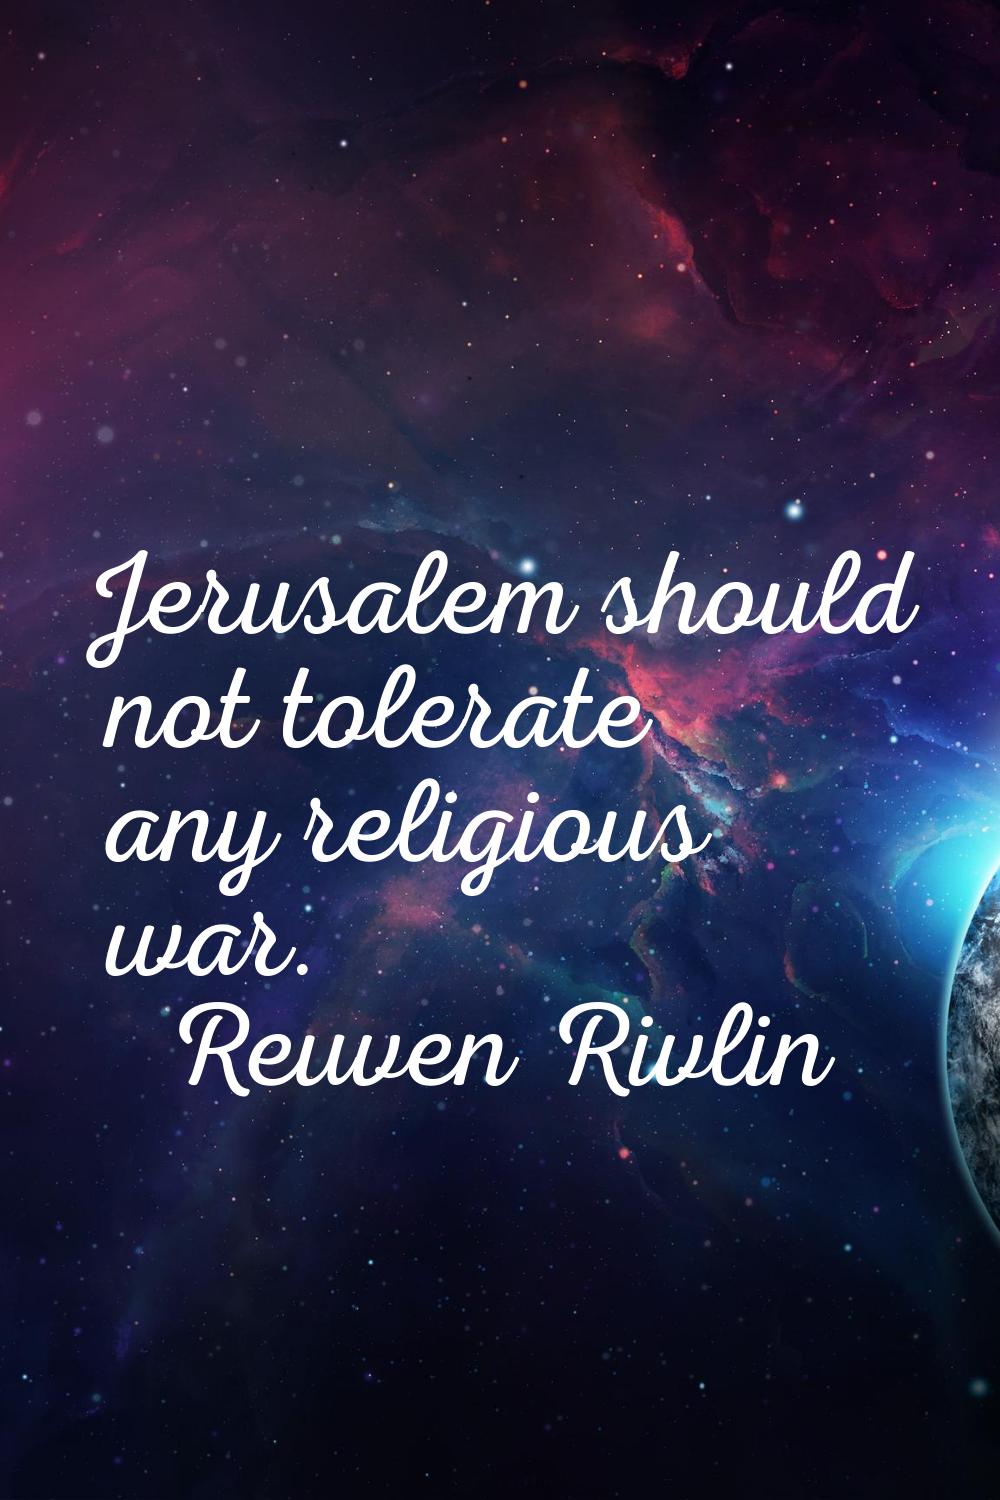 Jerusalem should not tolerate any religious war.